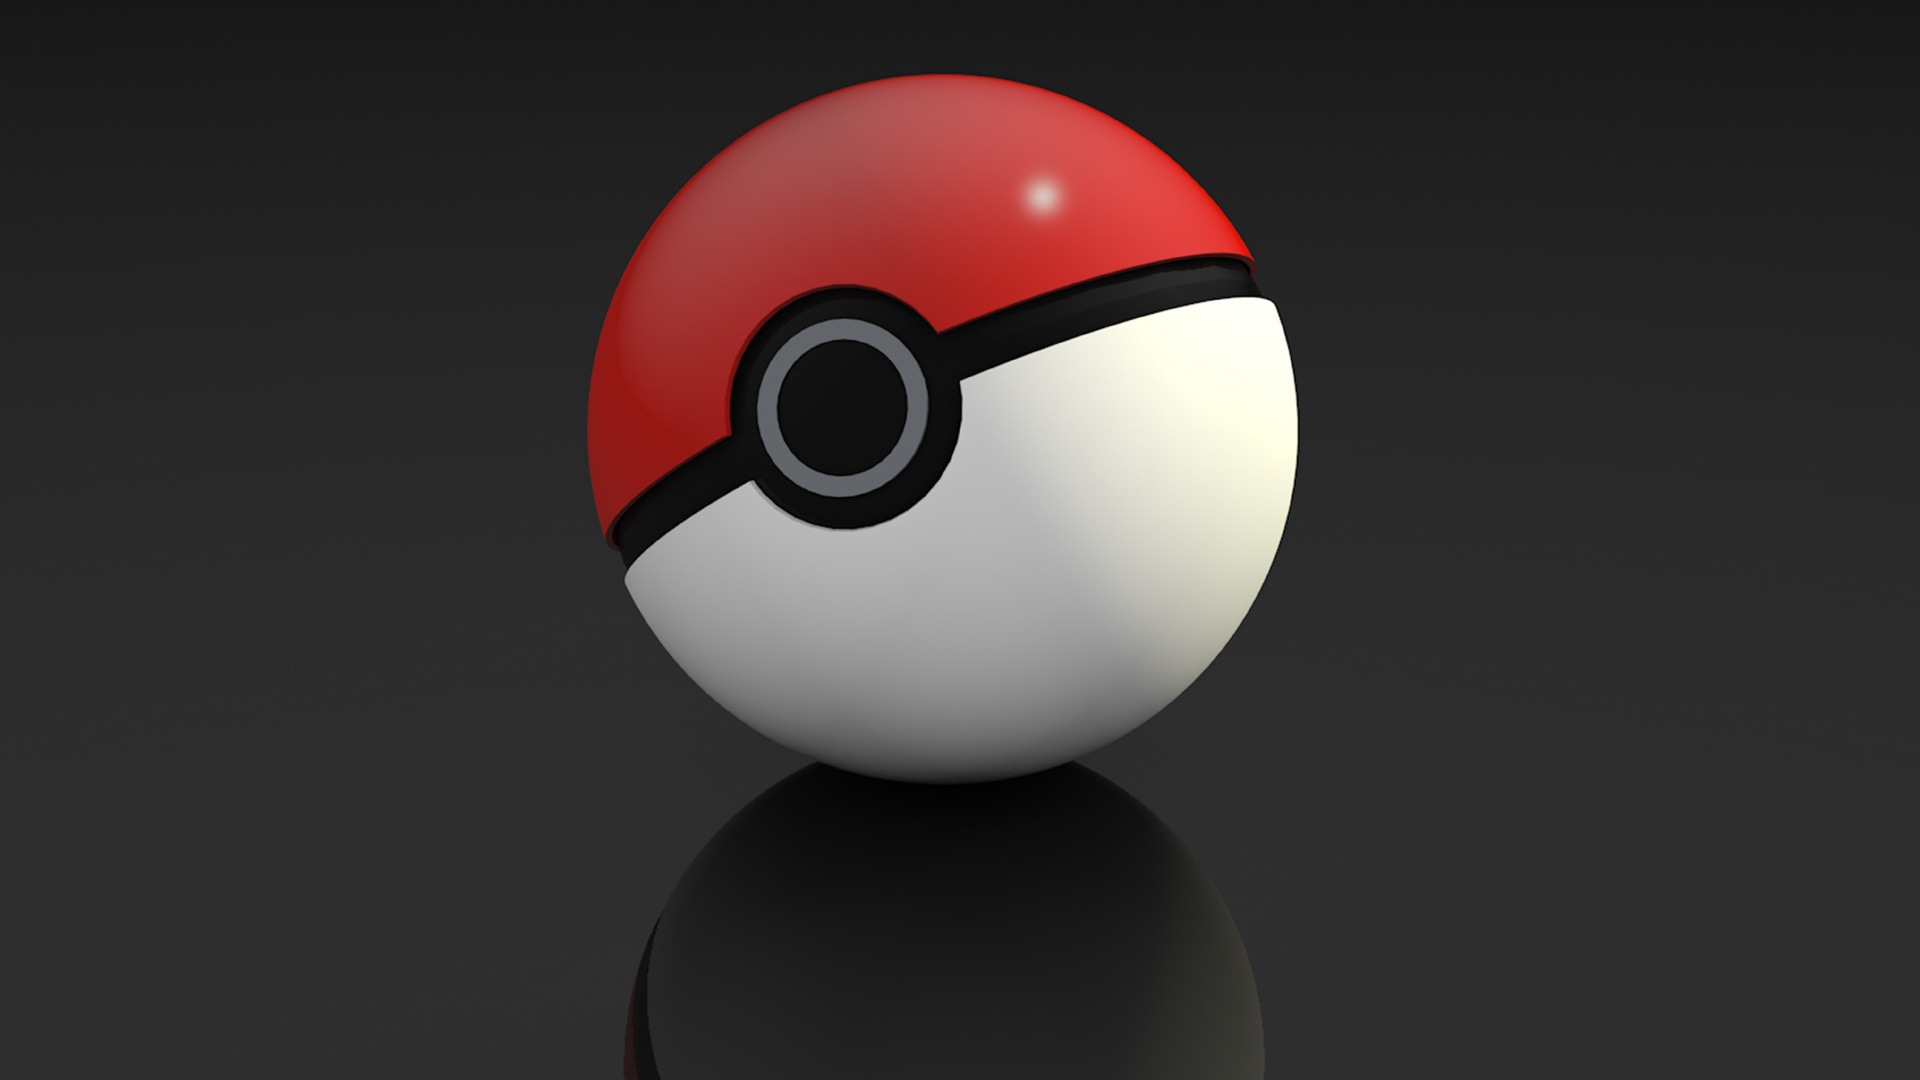 Pok Ball, Ball, Animation, Auge, Games. Wallpaper in 1920x1080 Resolution